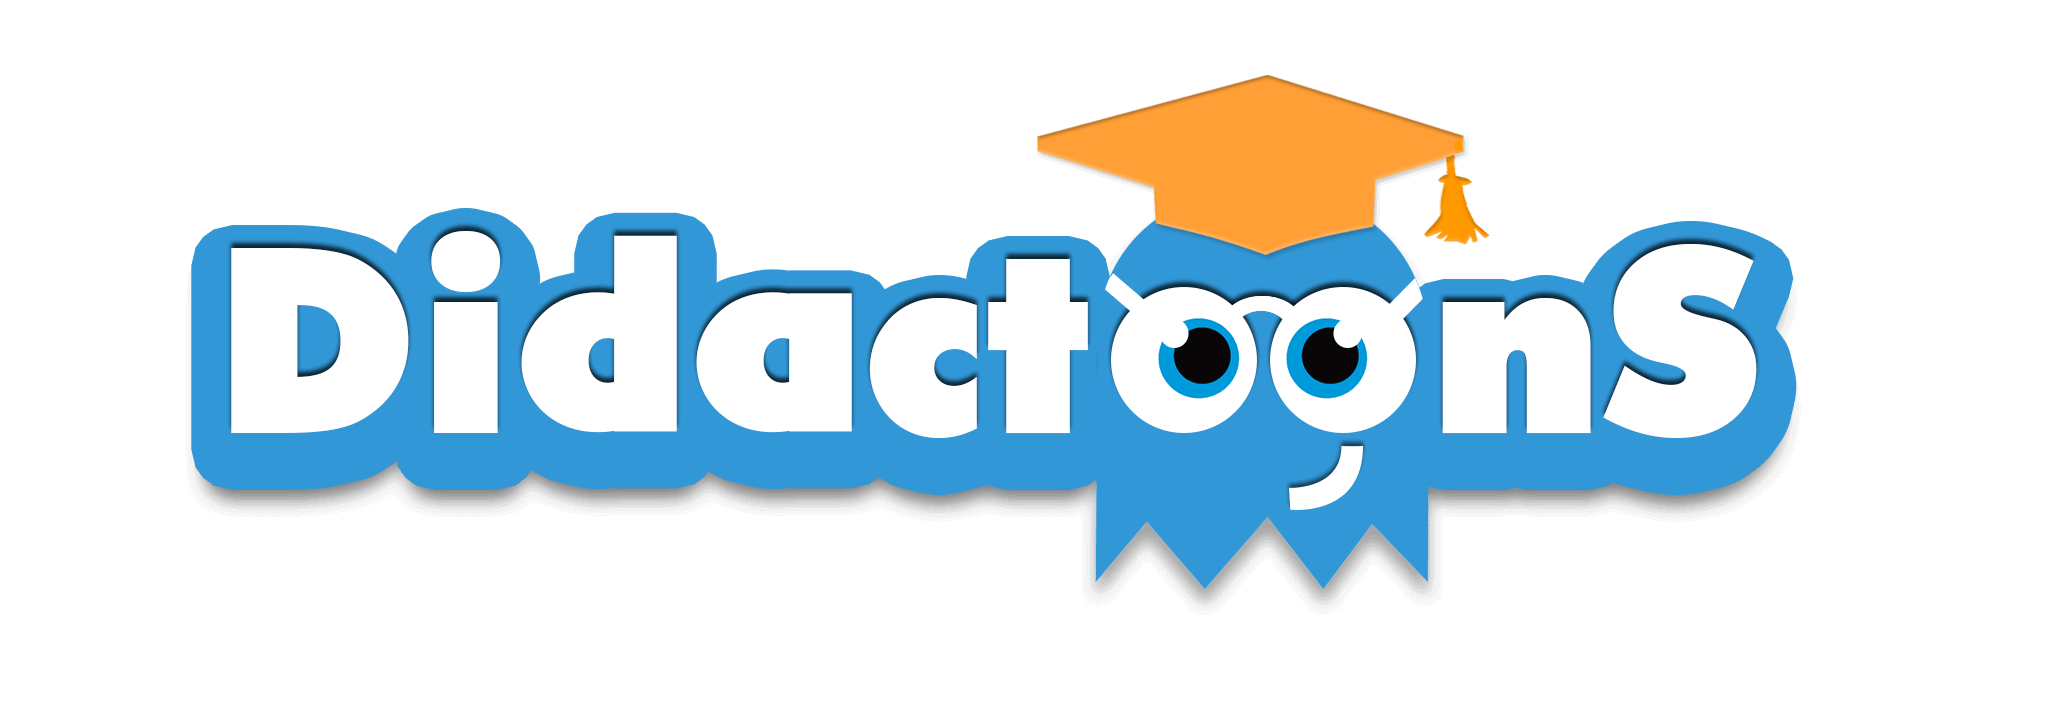 didactitoons-logo